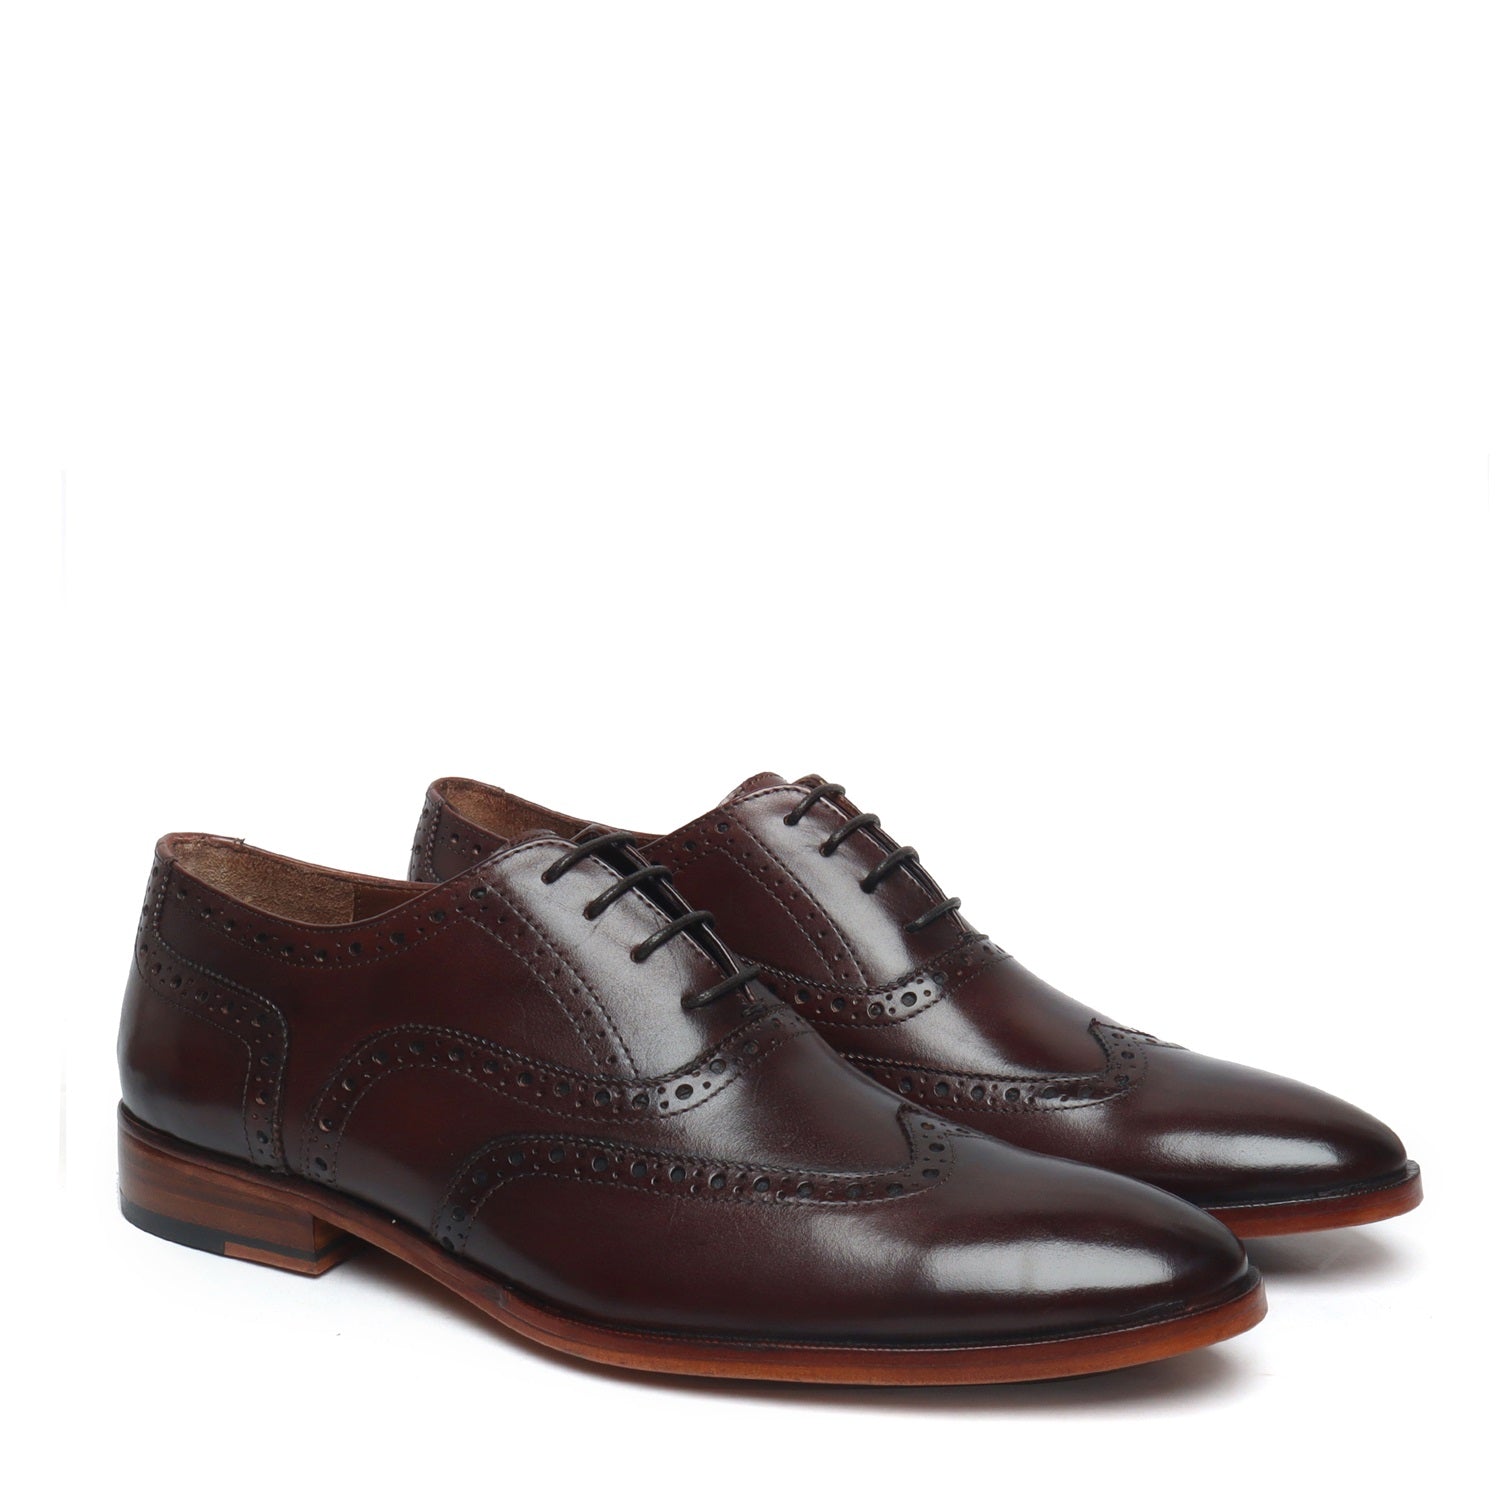 Oxford Lace-Up Shoe In Dark Brown Leather With Punching Brogue Design